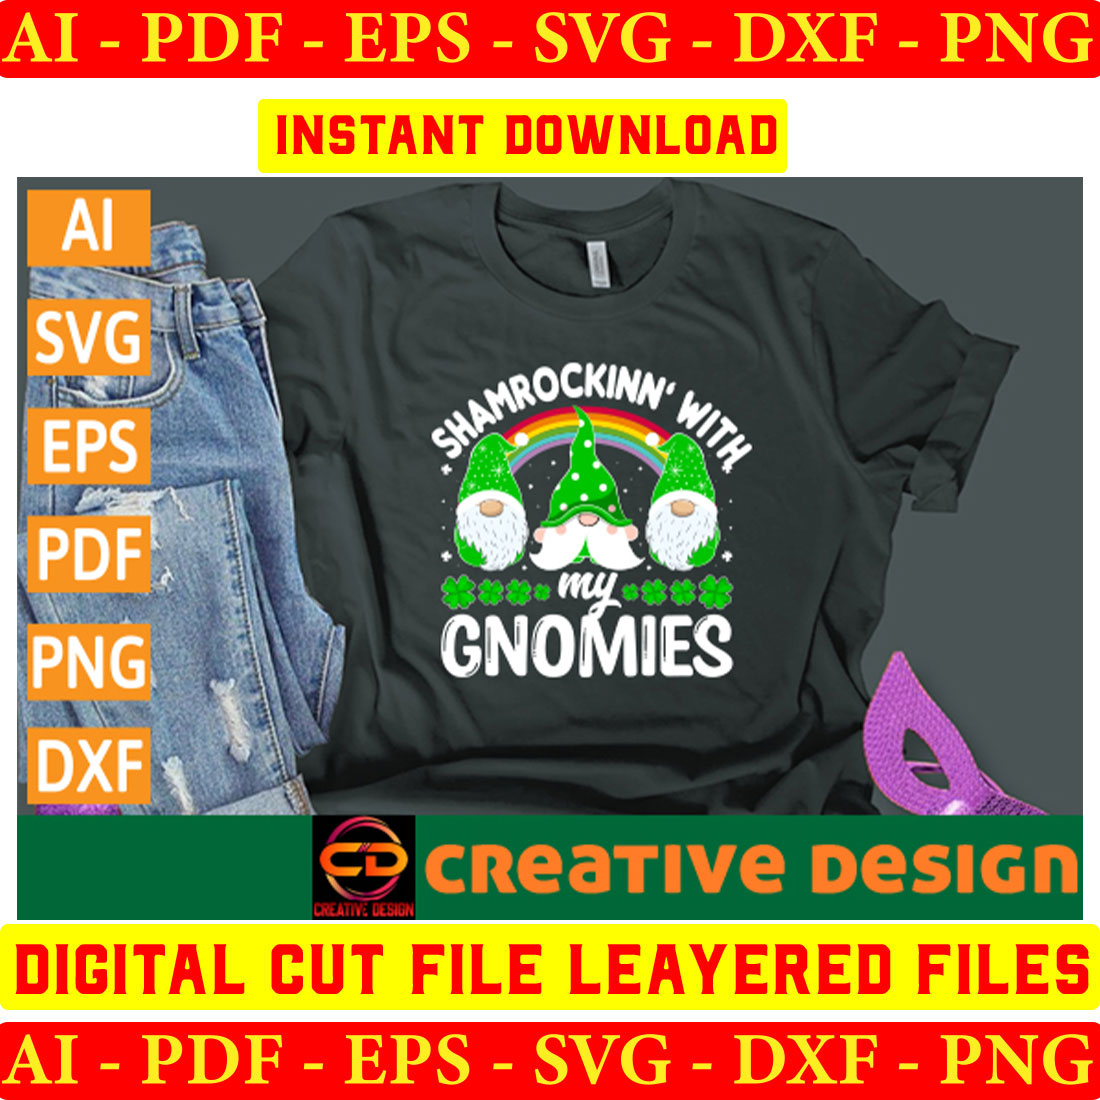 T - shirt that says shamrocks with gnomes on it.